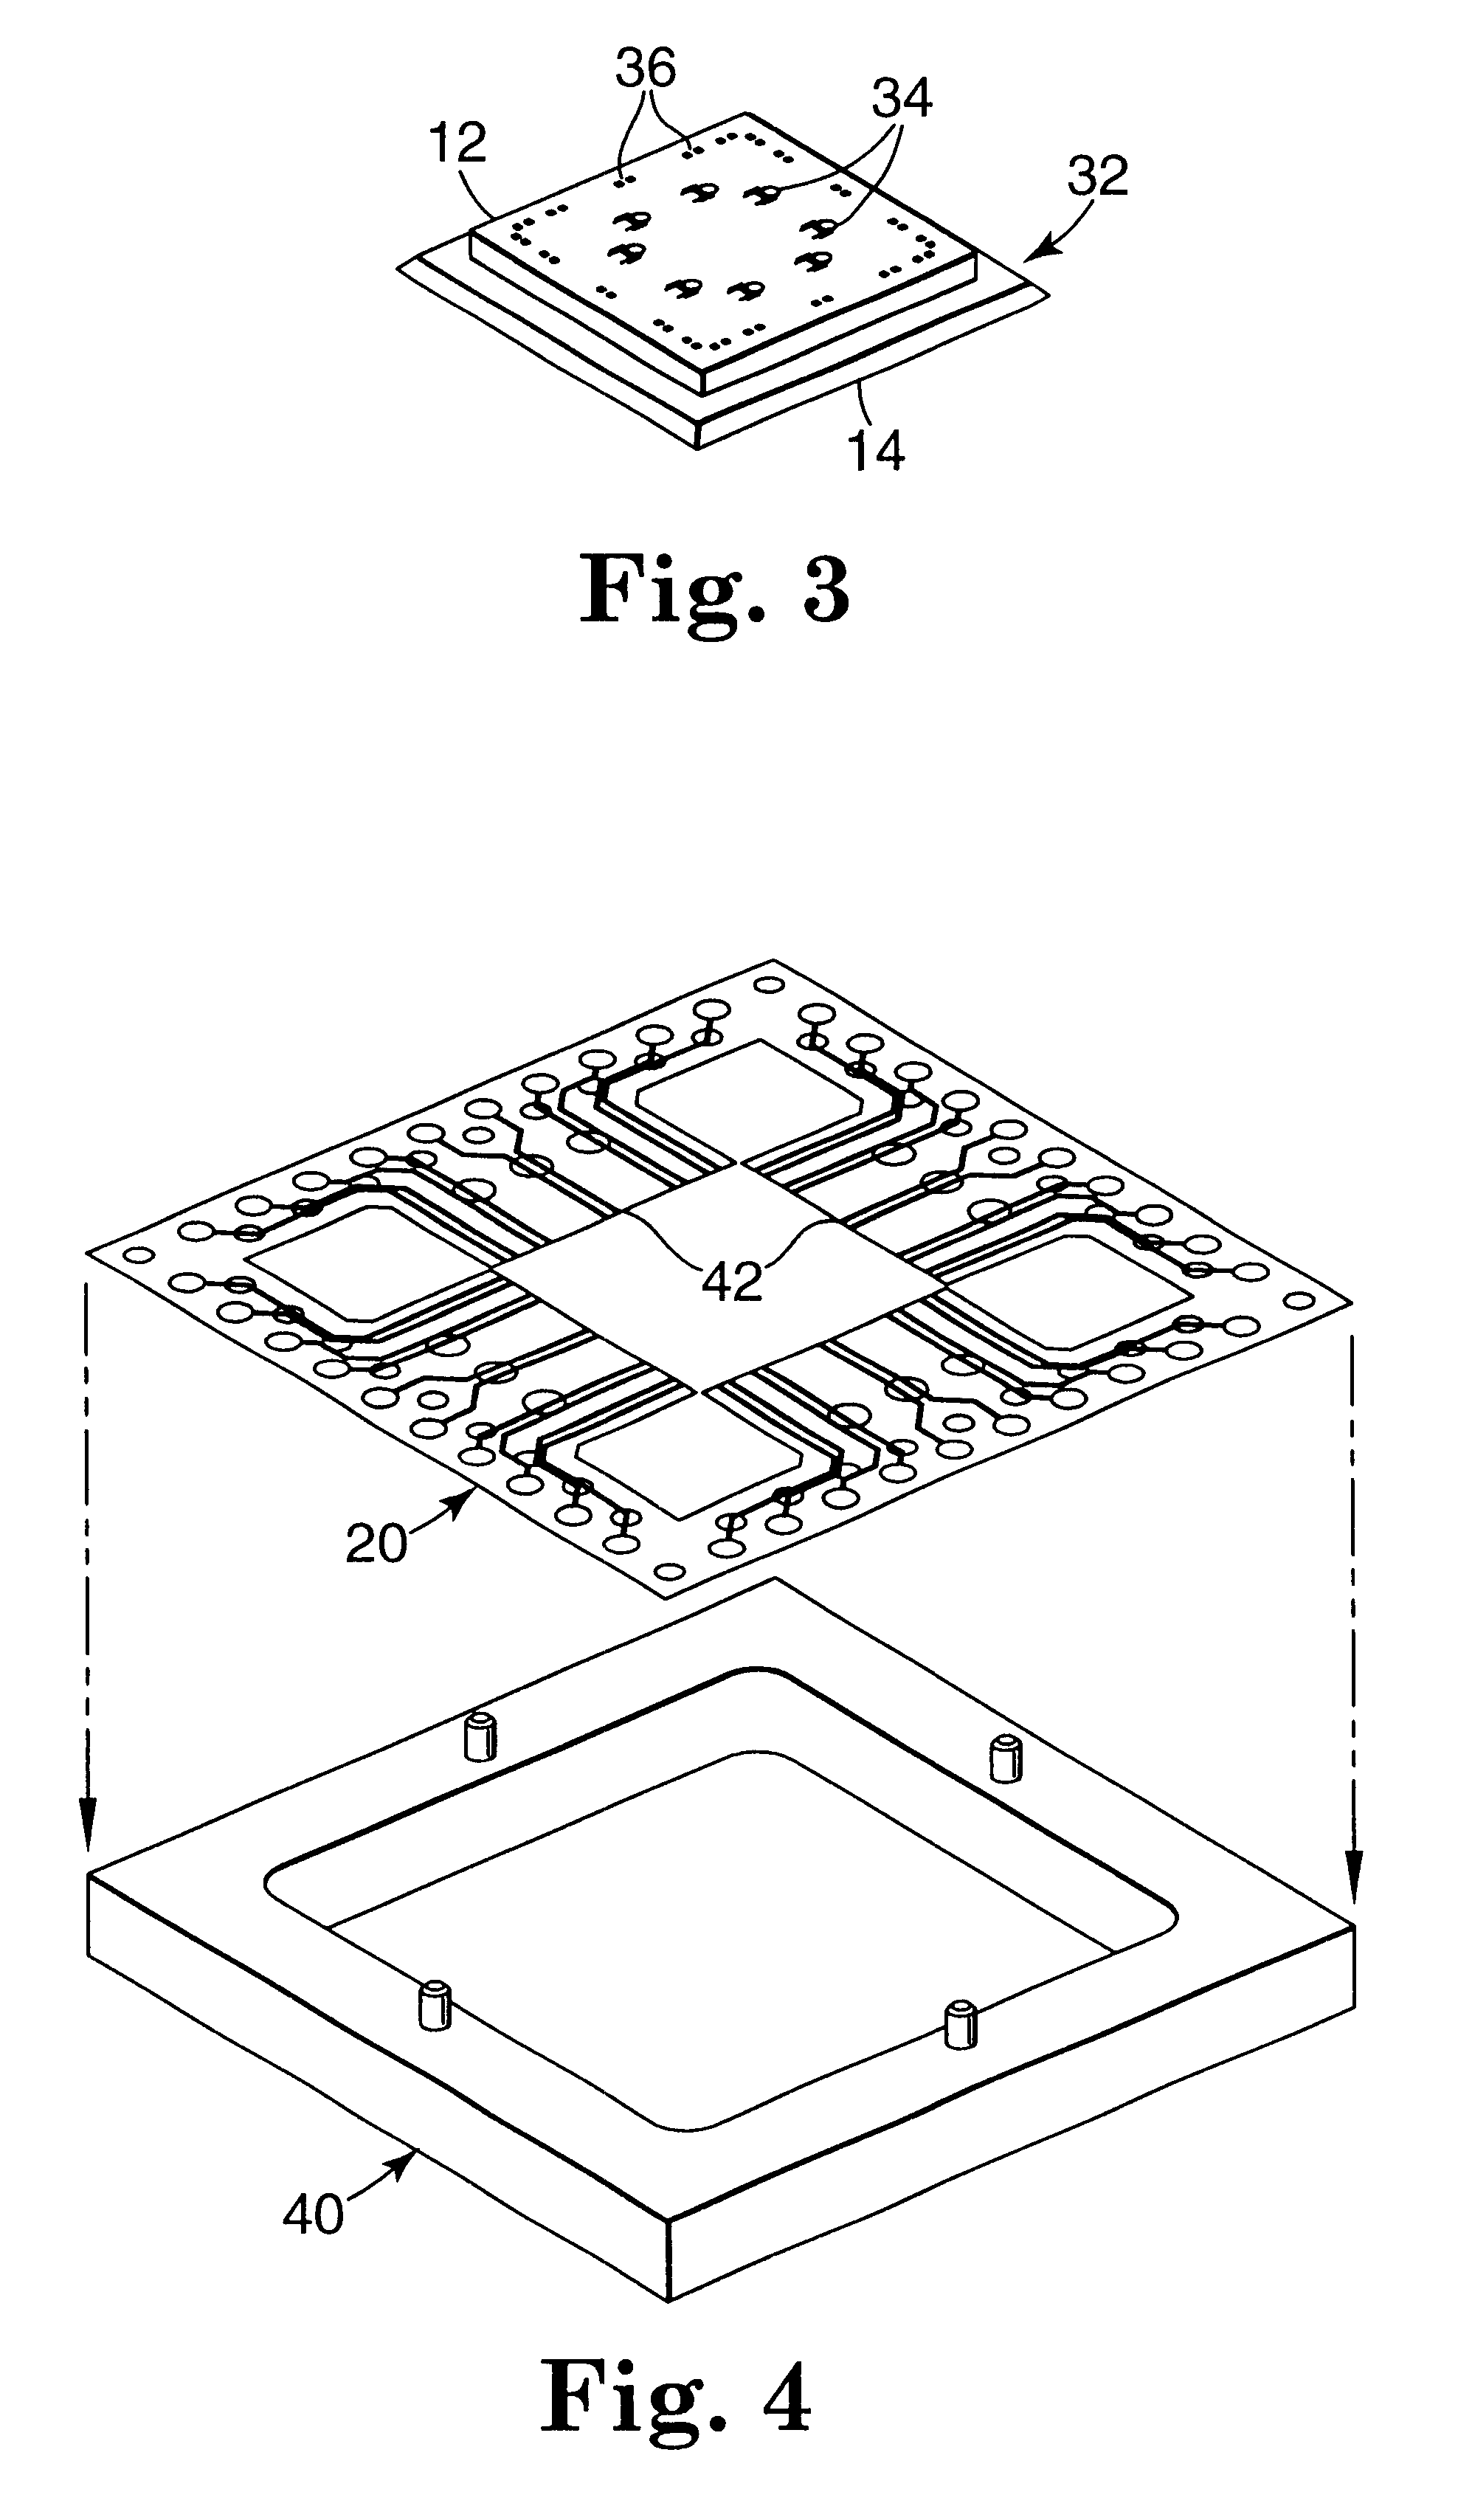 MEMS package with flexible circuit interconnect